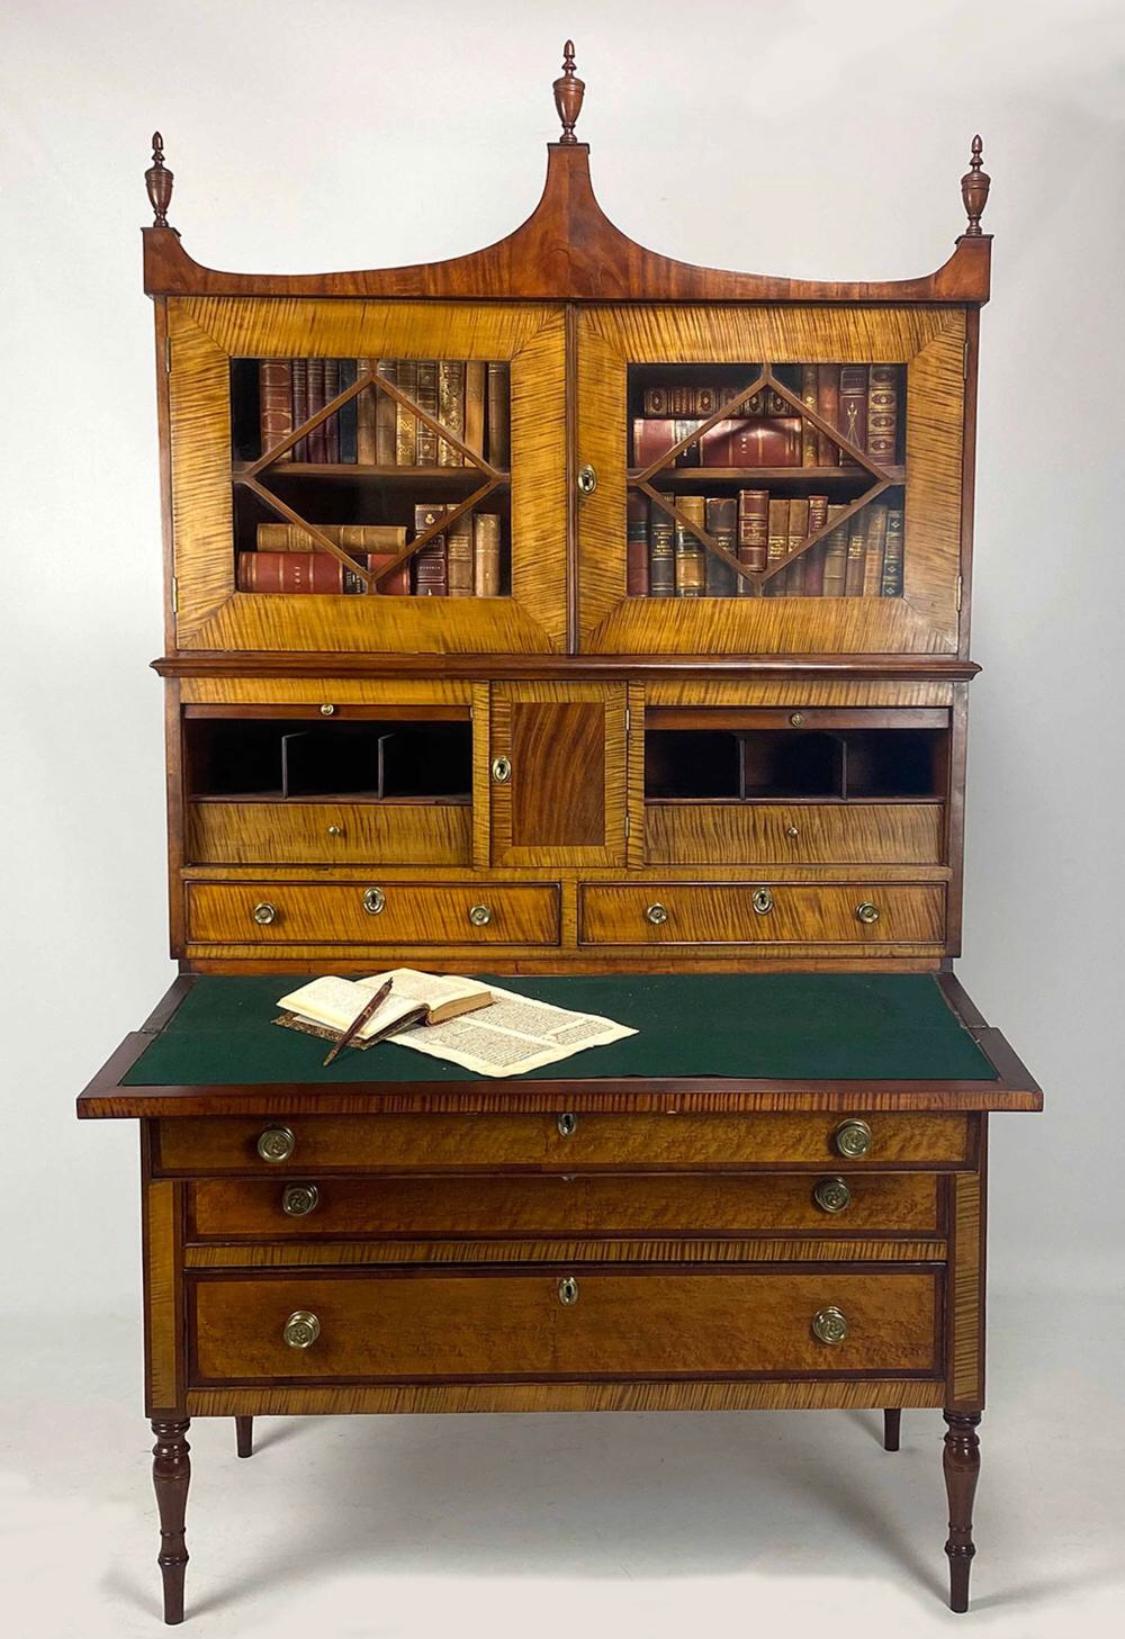 All original in in excellent condition dating to circa 1815. Three part, top section has shaped crest with three turned urn finials above pair of glazed doors; mid-section has centered cupboard fitted with drawers, flanked by tambour doors, interior